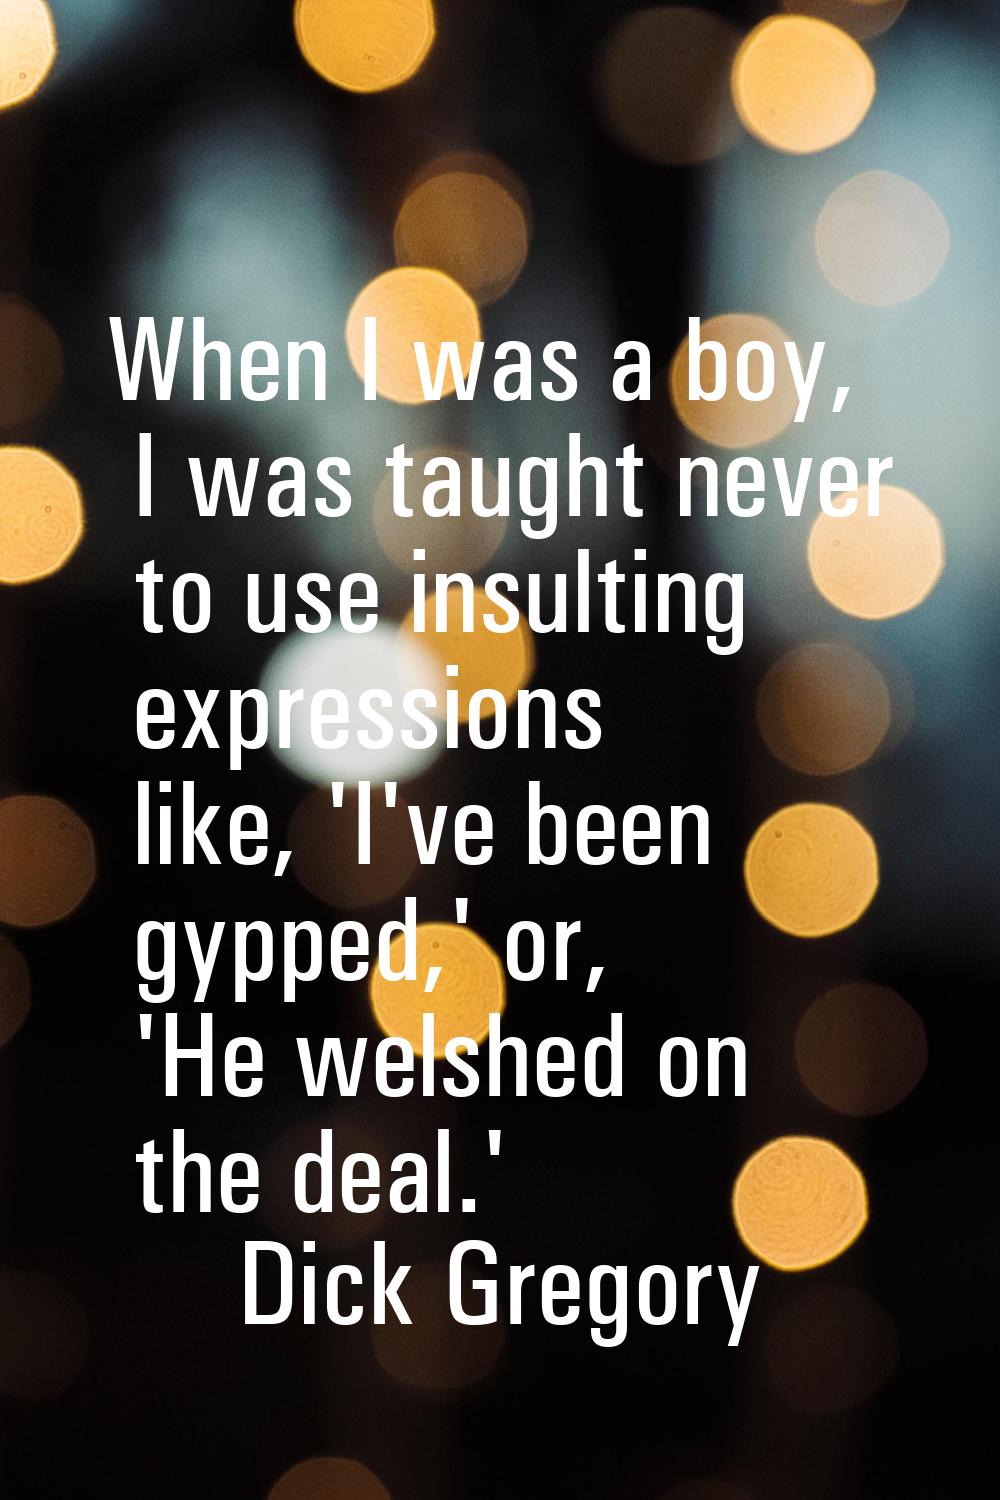 When I was a boy, I was taught never to use insulting expressions like, 'I've been gypped,' or, 'He